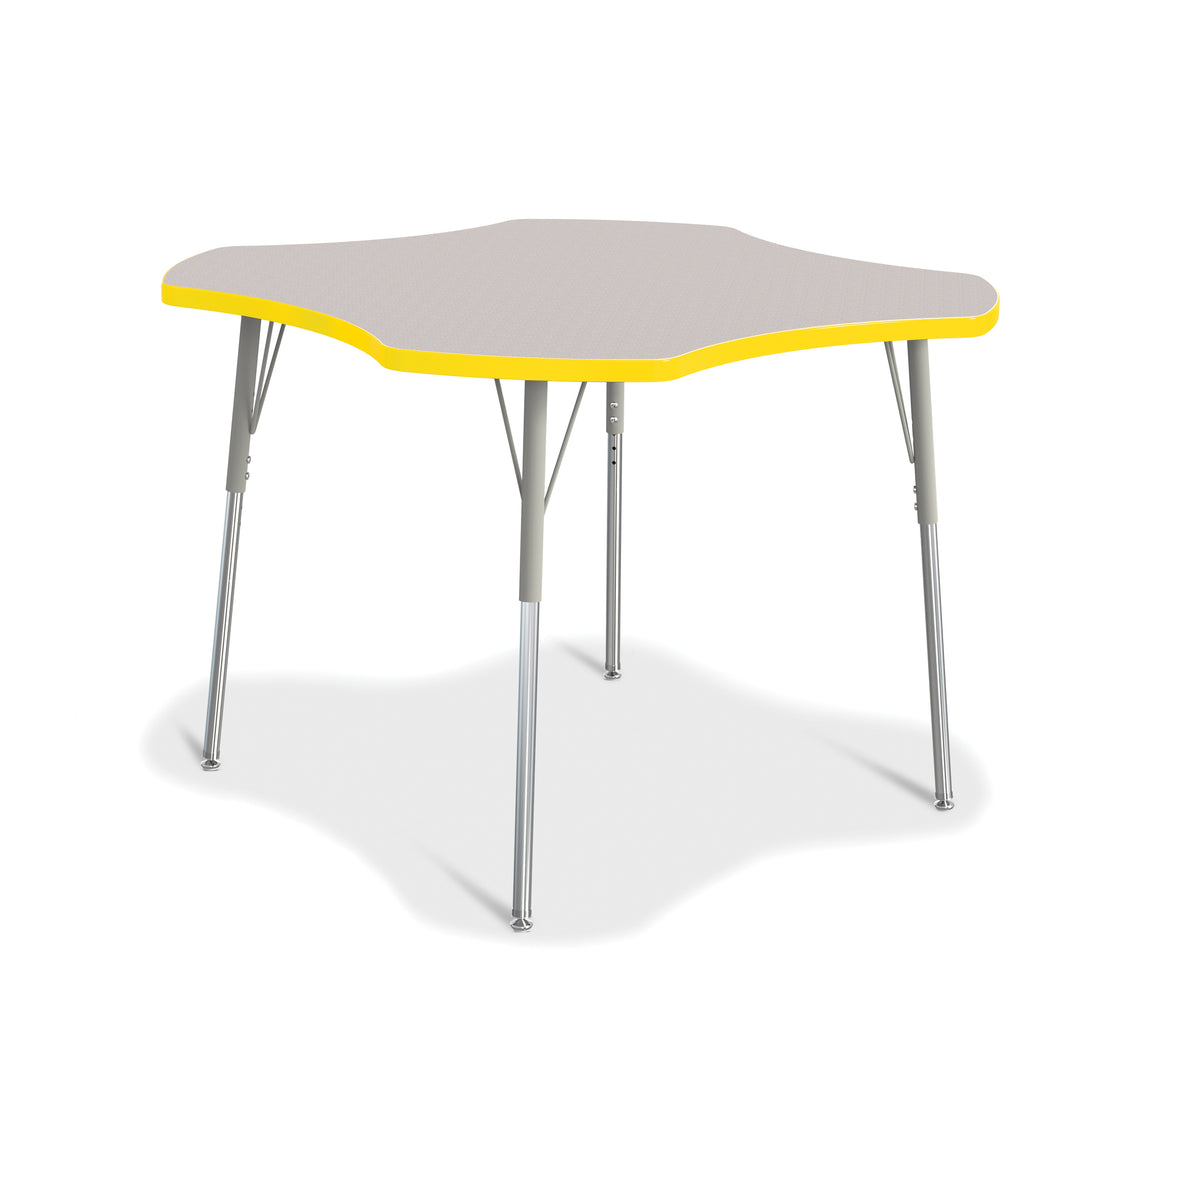 6453JCA007, Berries Four Leaf Activity Table, A-height - Freckled Gray/Yellow/Gray